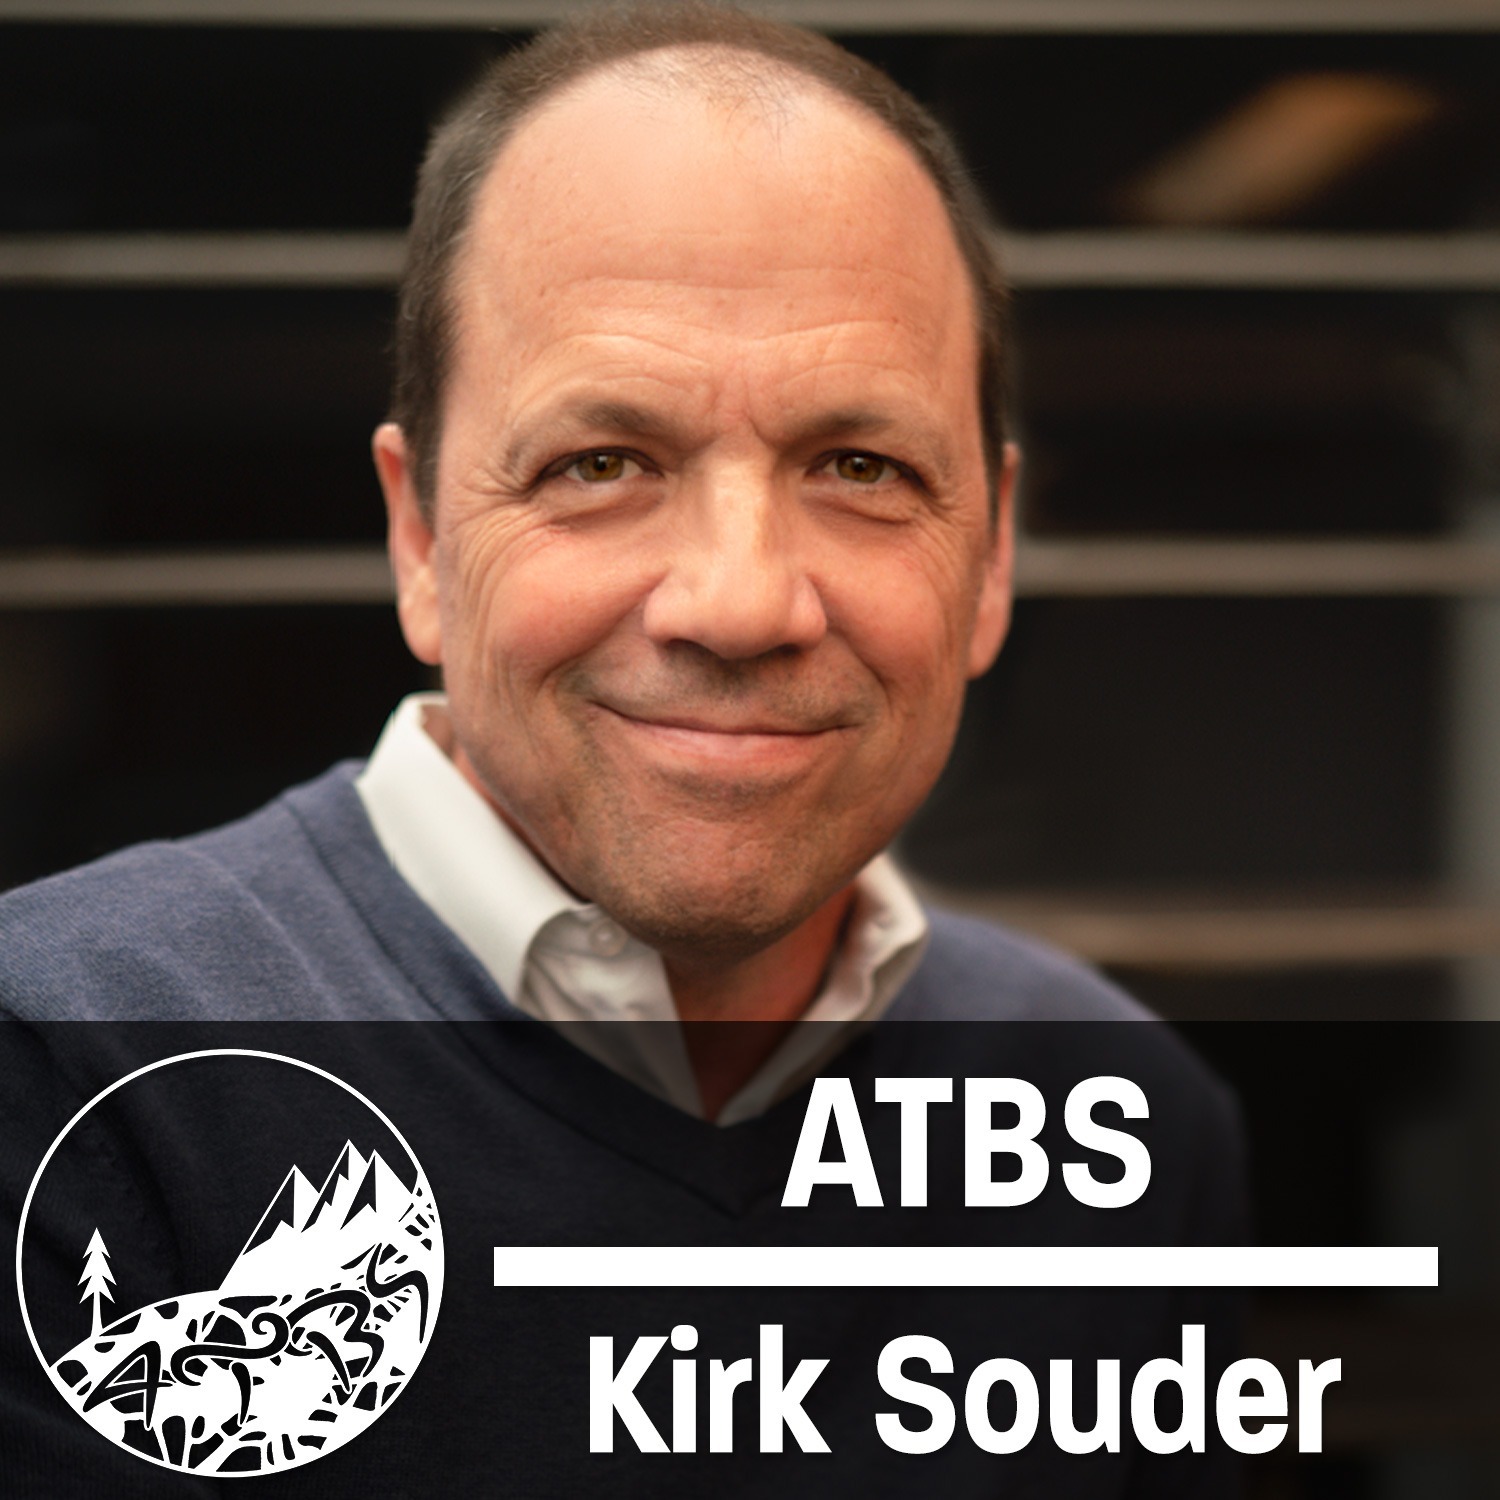 A Conversational Jam Session - With Kirk Souder - ATBS #43